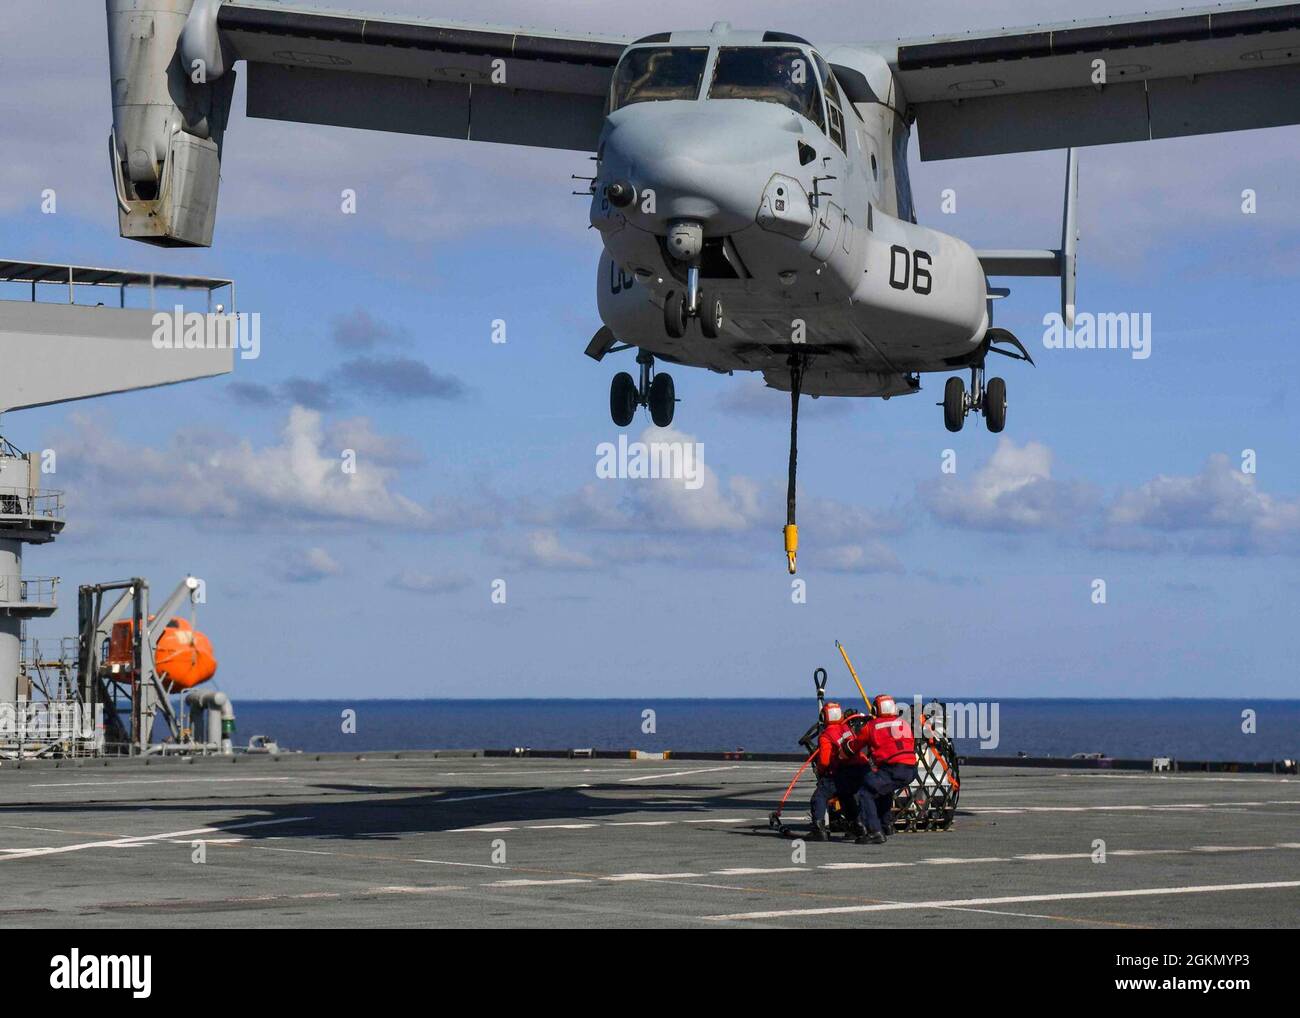 ATLANTIC OCEAN (June 1, 2021) Aviation Ordnanceman 3rd Class Angel Reyessuarez, left, and Aviation Ordnanceman 1st Class Matthew Watson prepare to hook up a training pallet to an MV-22 Osprey assigned to the Marine Medium Tiltrotor Squadron 261 (VMM-261) “Raging Bulls” during a deck landing qualification exercise (DLQ) aboard the Expeditionary Sea Base USS Hershel “Woody” Williams (ESB 4) in the Atlantic Ocean, June 1, 2021. Hershel “Woody” Williams is on a scheduled deployment in the U.S. Sixth Fleet area of operations in support of U.S. national interests and security in Europe and Africa. Stock Photo